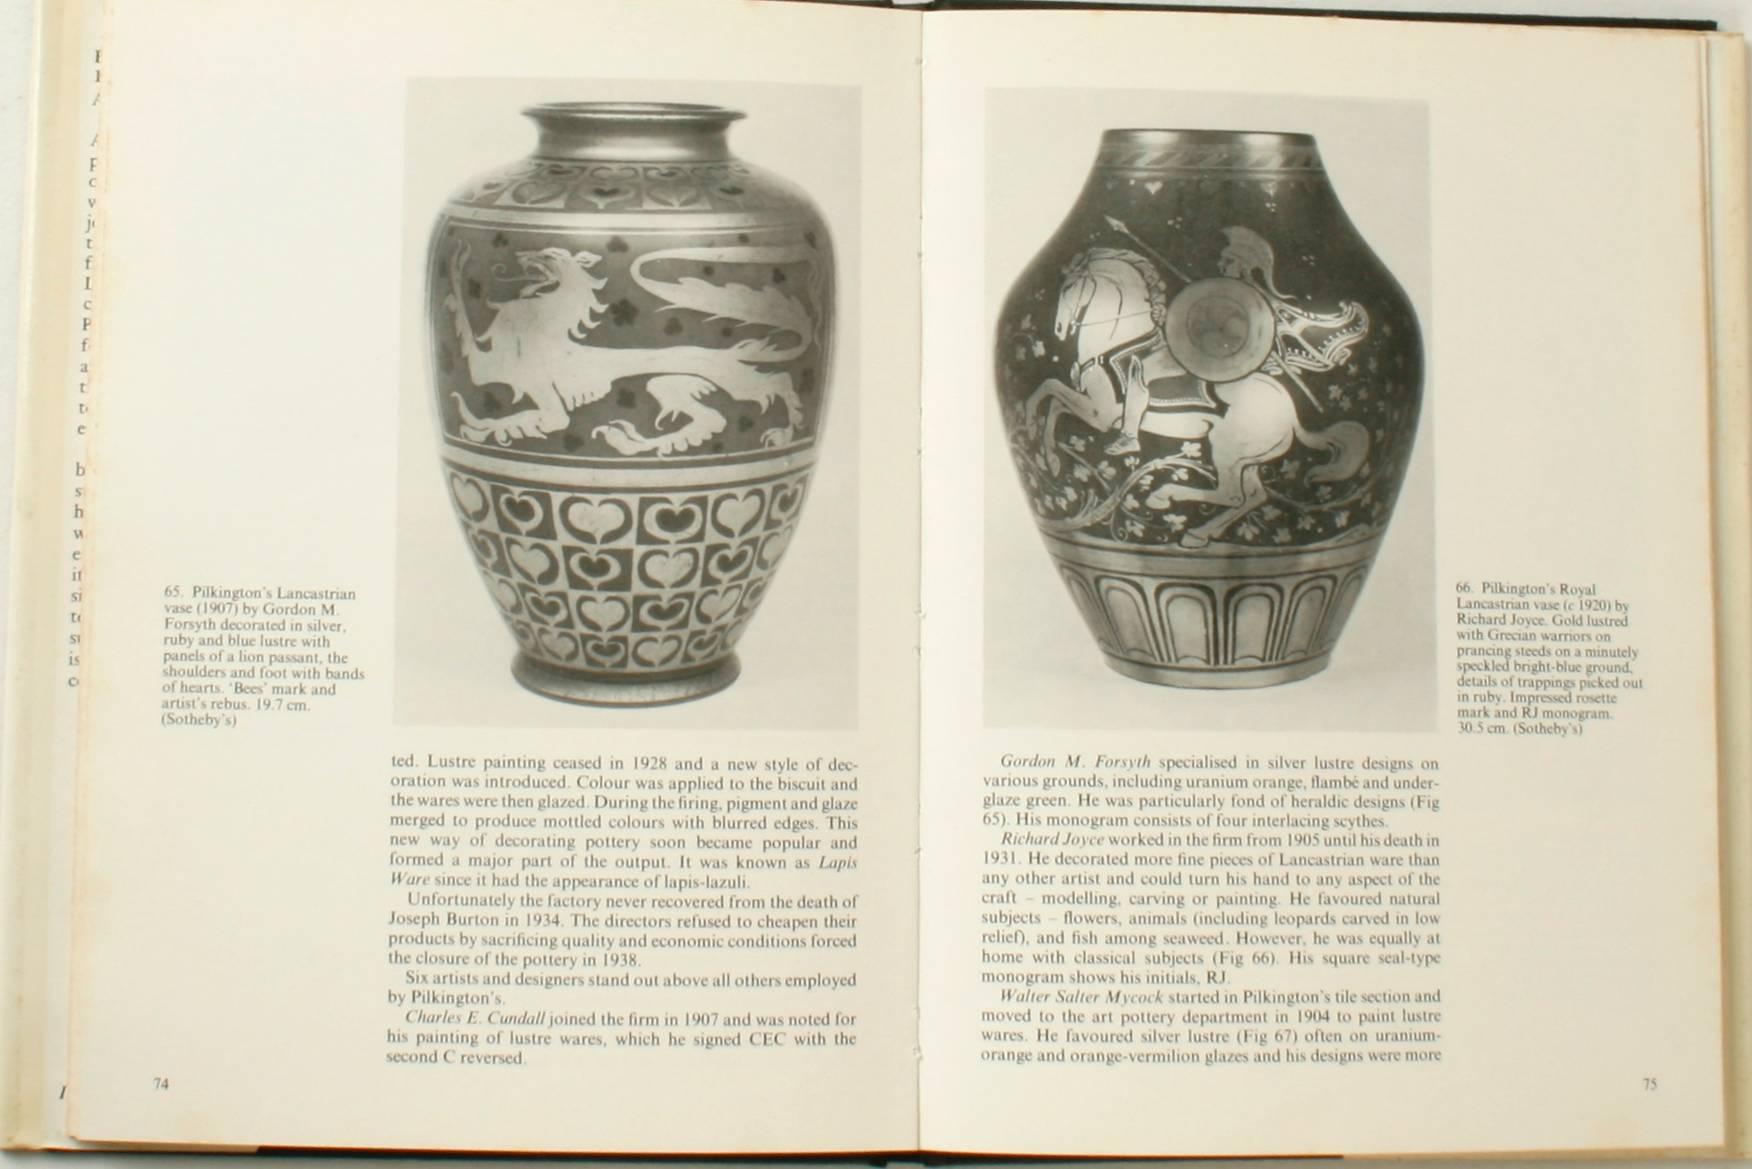 British Art Pottery. by A.W. Coysh. London: David and Charles Limited, 1976. First edition hardcover with dust jacket. 96 pp. A reference book of British Art Pottery from 1870-1940. Art pottery, or Studio Pottery is defined as 'pottery designed and